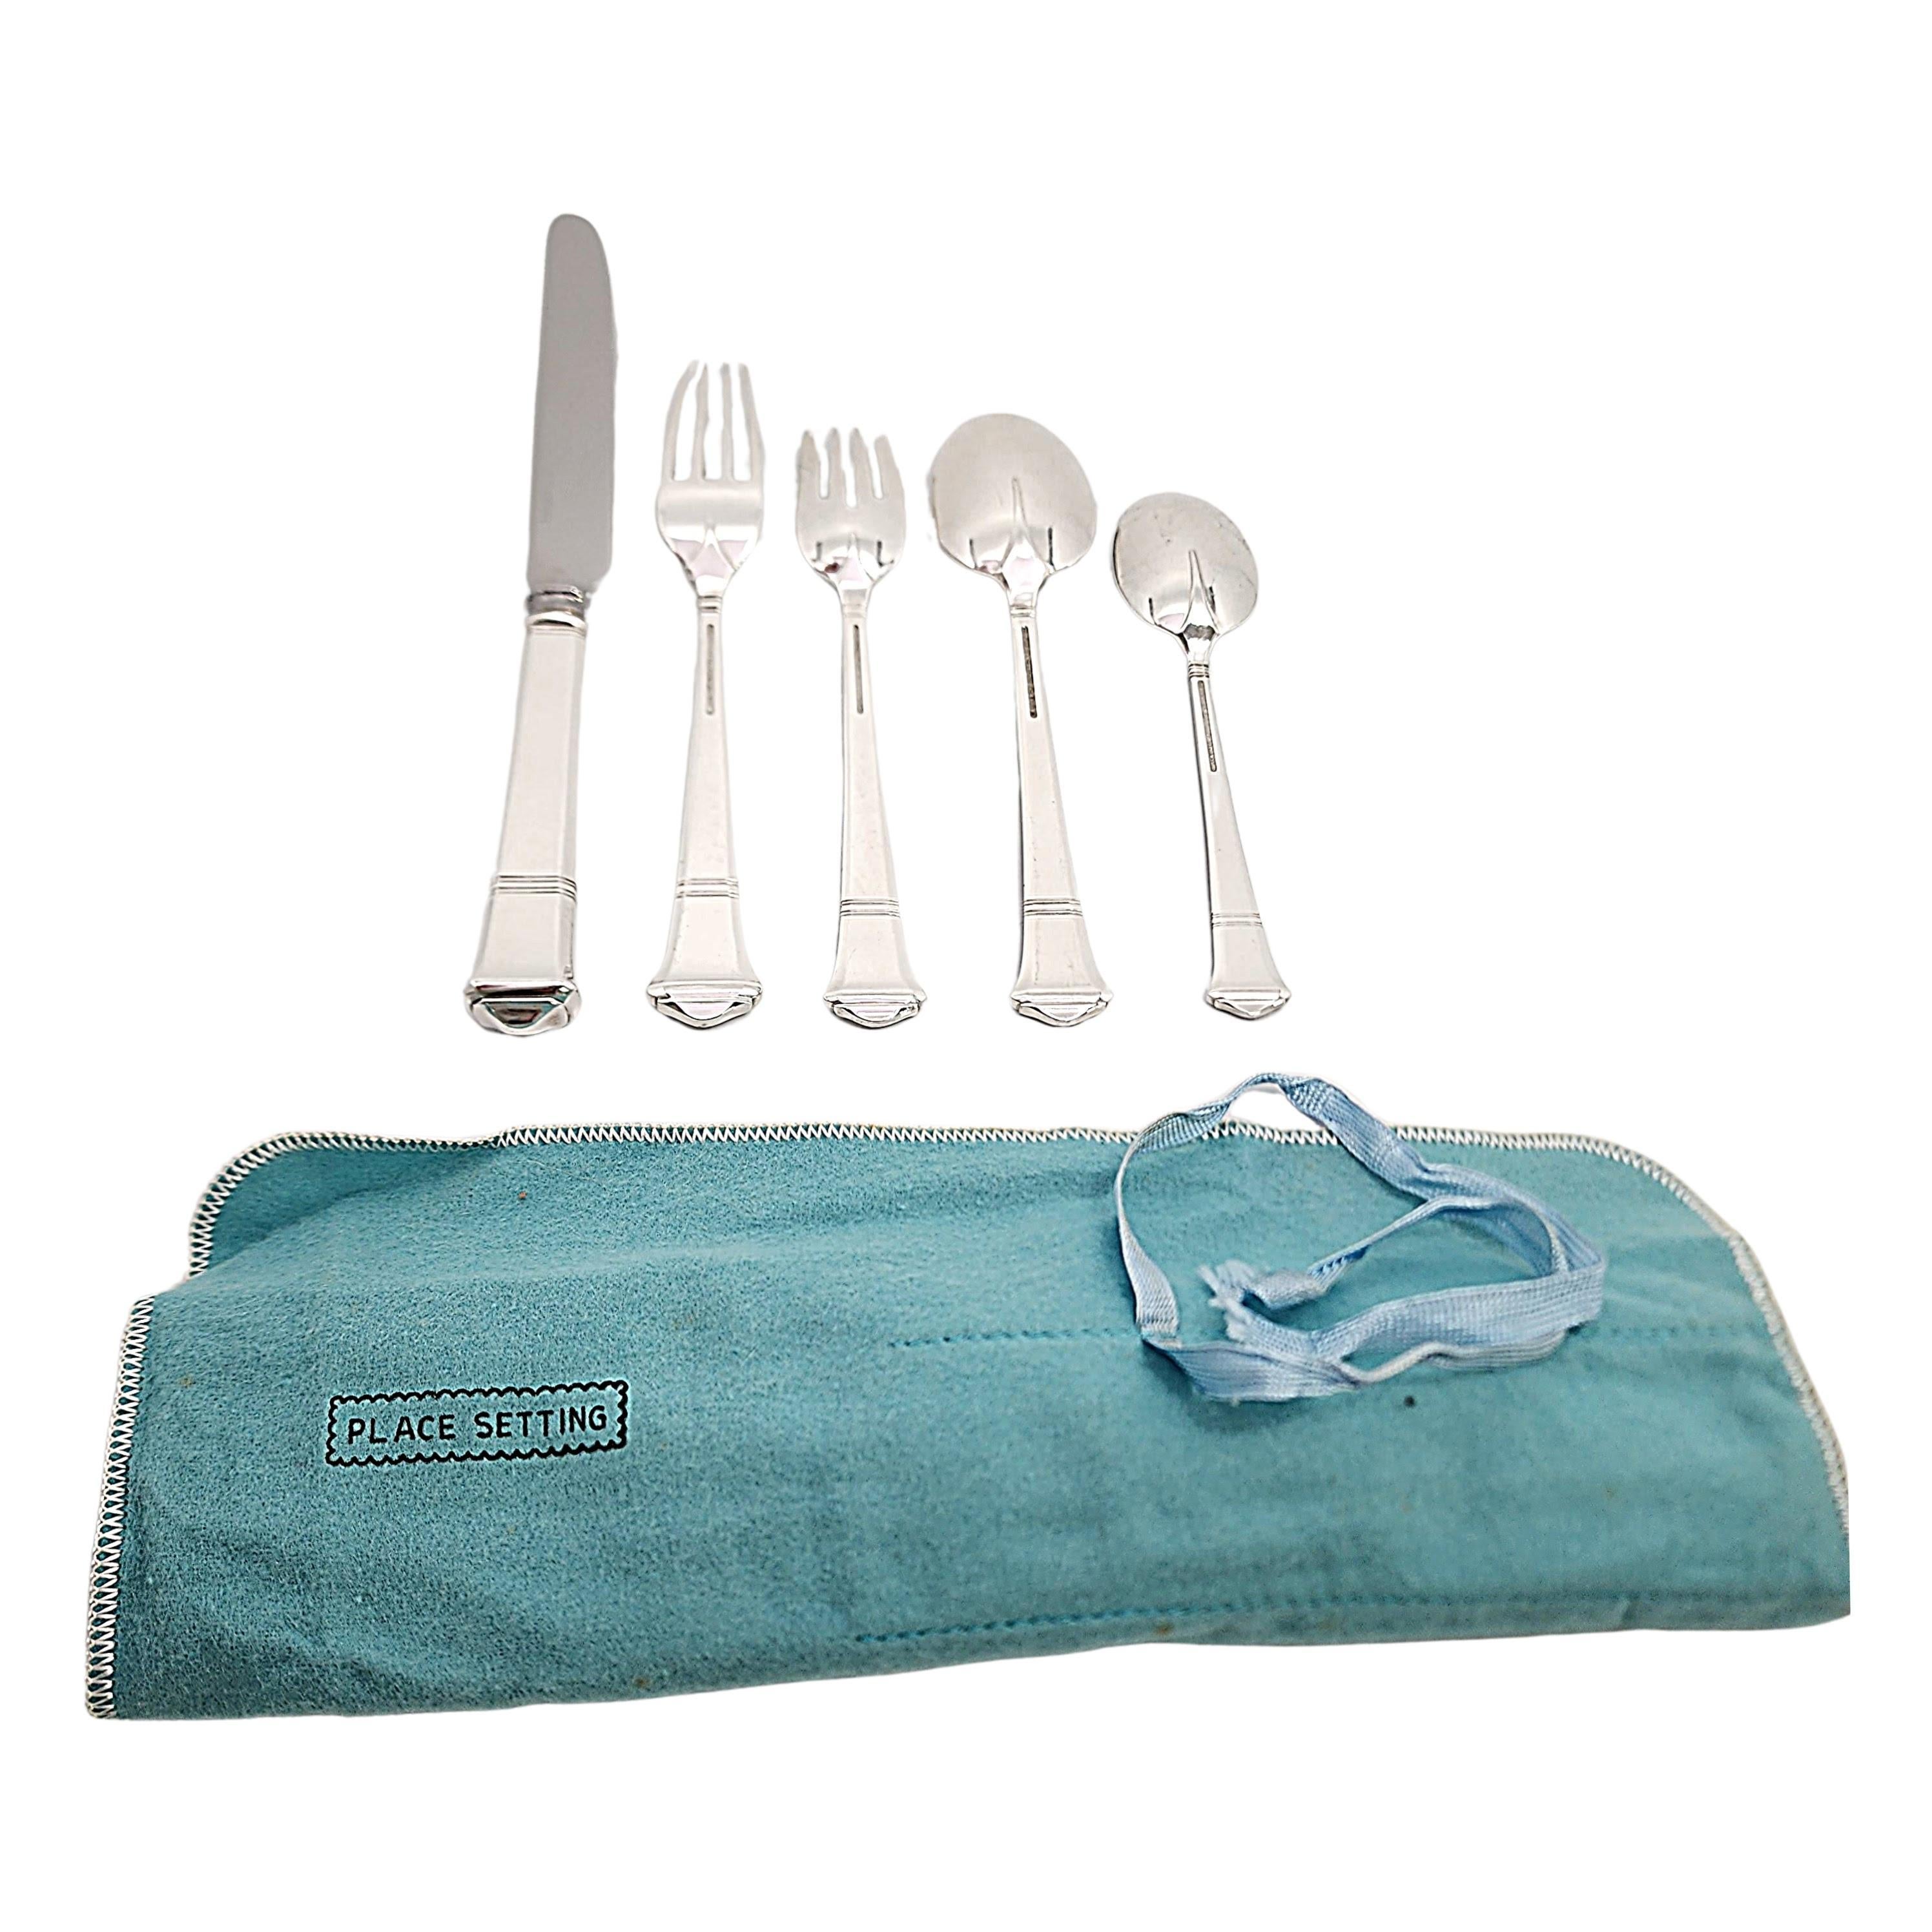 5pc dinner place setting by Tiffany & Co in the Windham pattern with pouch.

No monogram

Beautiful 5pc dinner setting includes knife, dinner fork, salad fork, place/oval soup spoon and teaspoon. Tiffany's Windham pattern was designed by Arthur